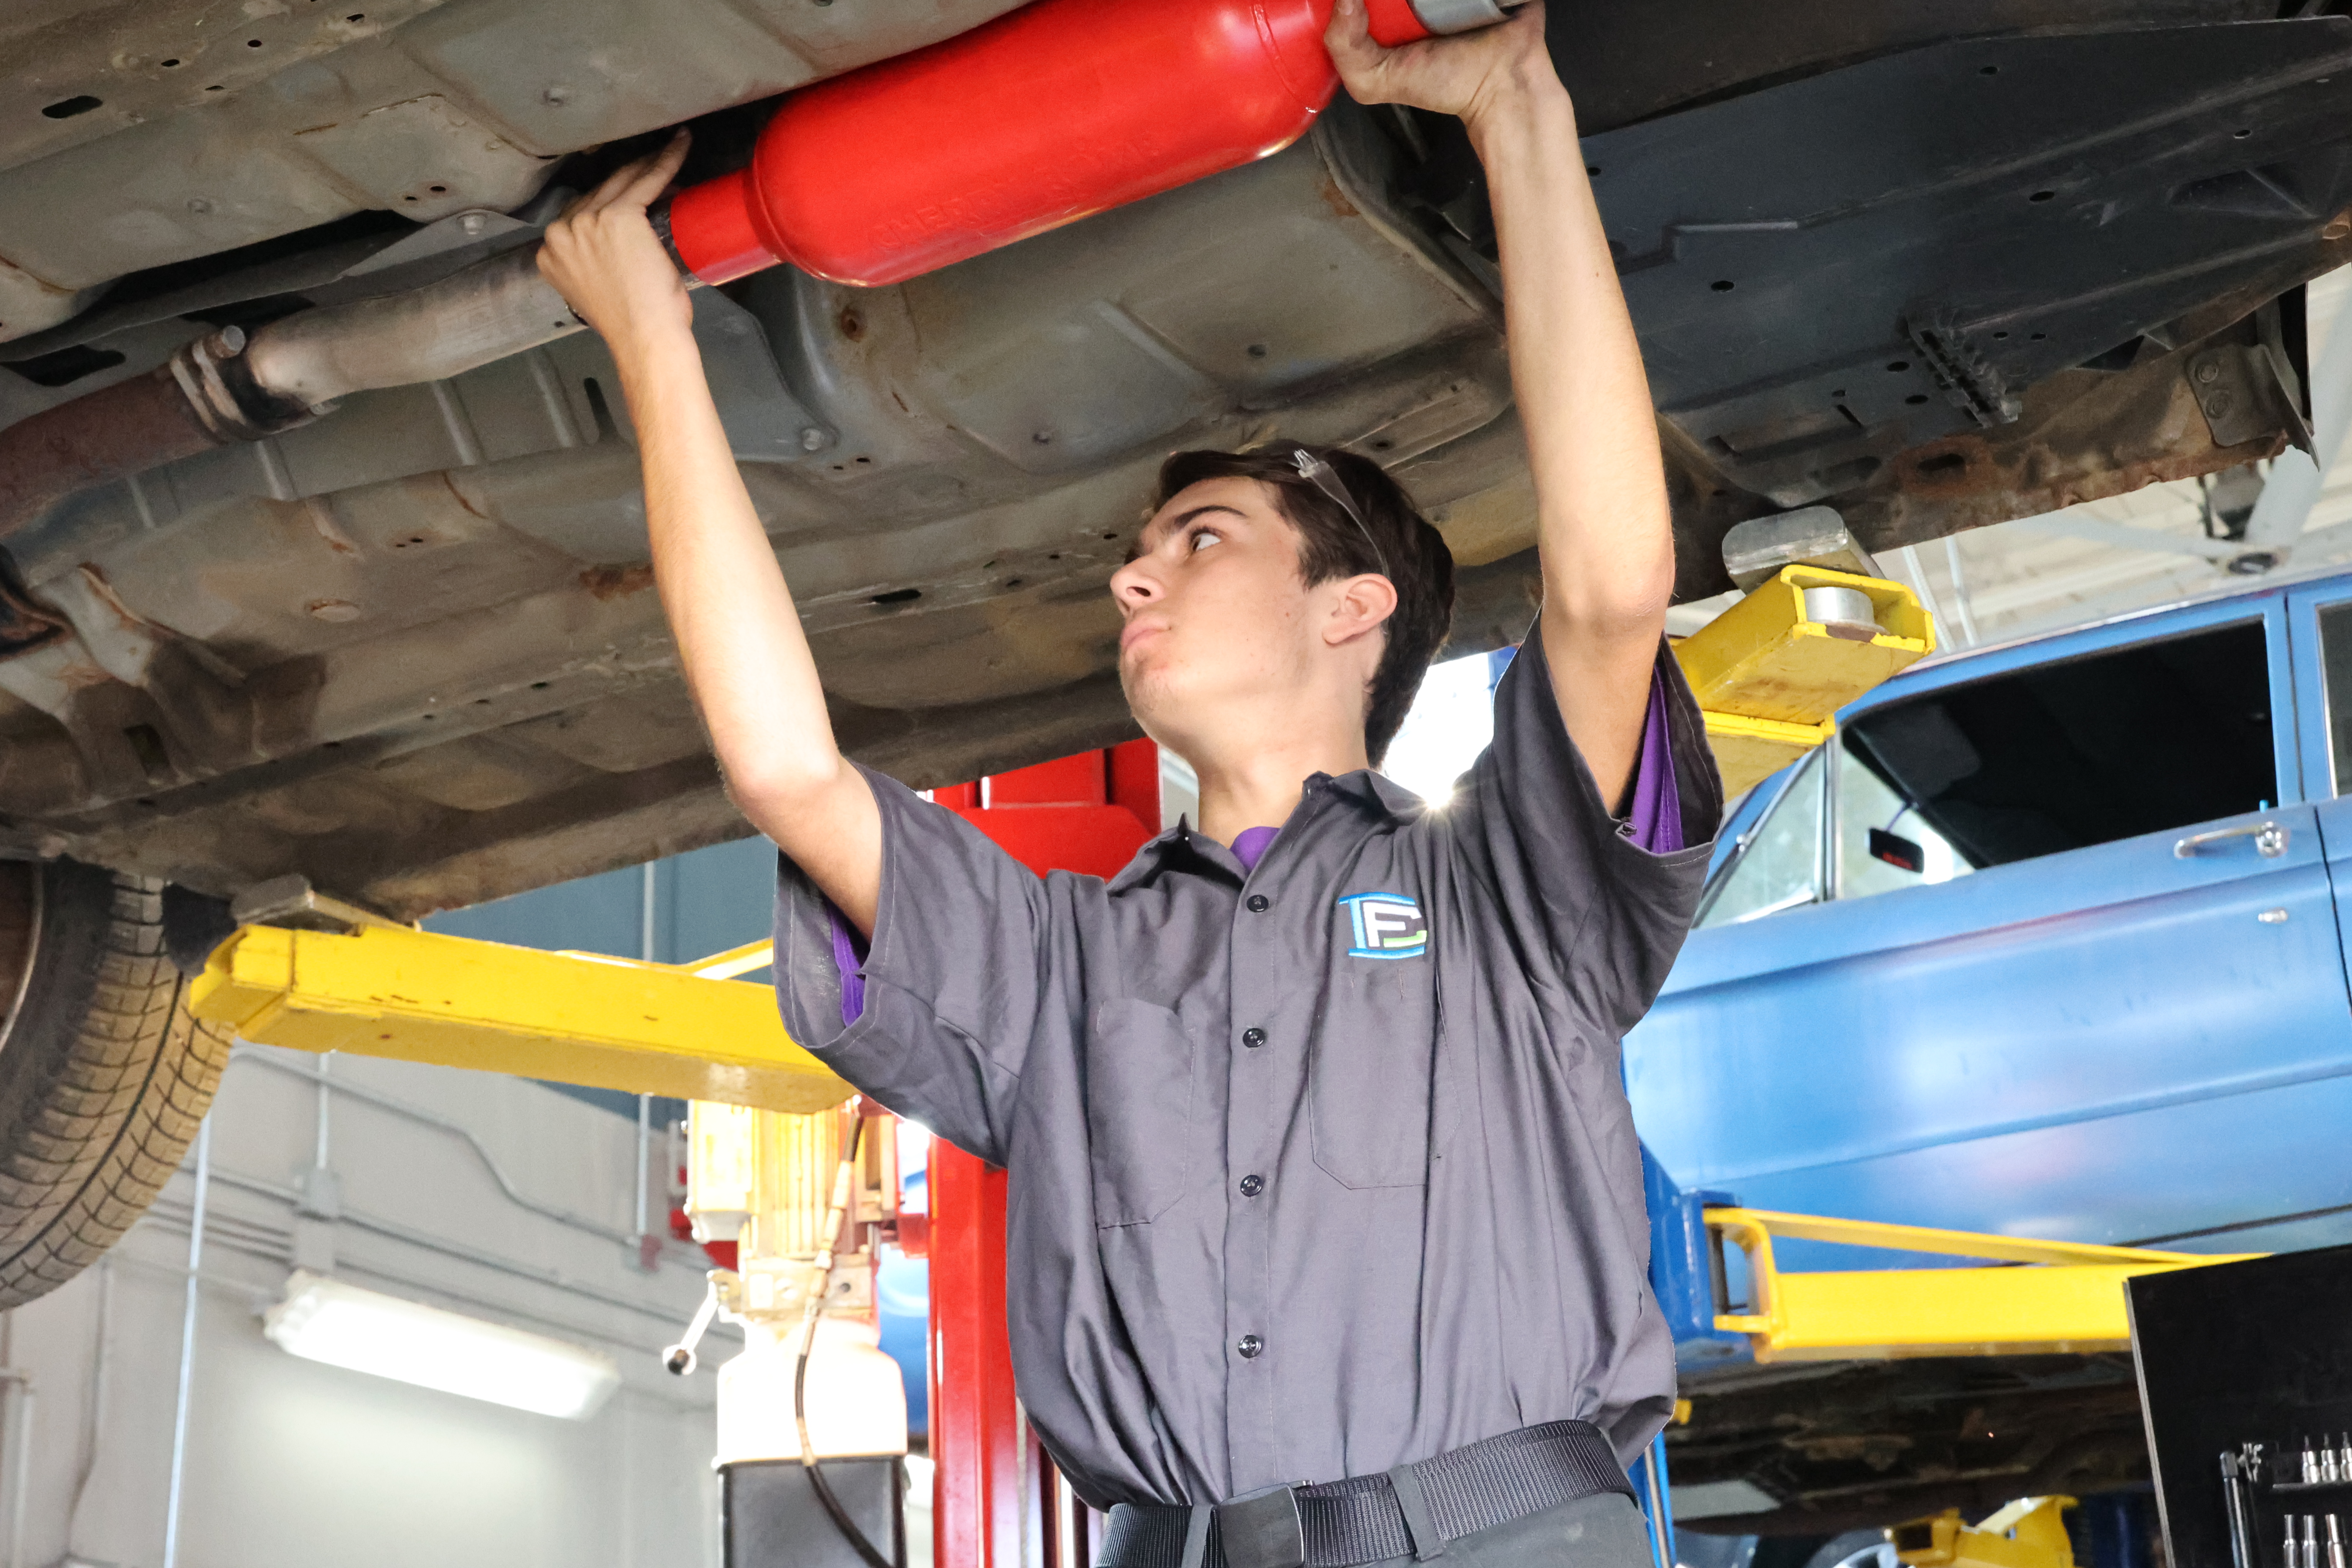 White male student installing a muffler system underneath a car